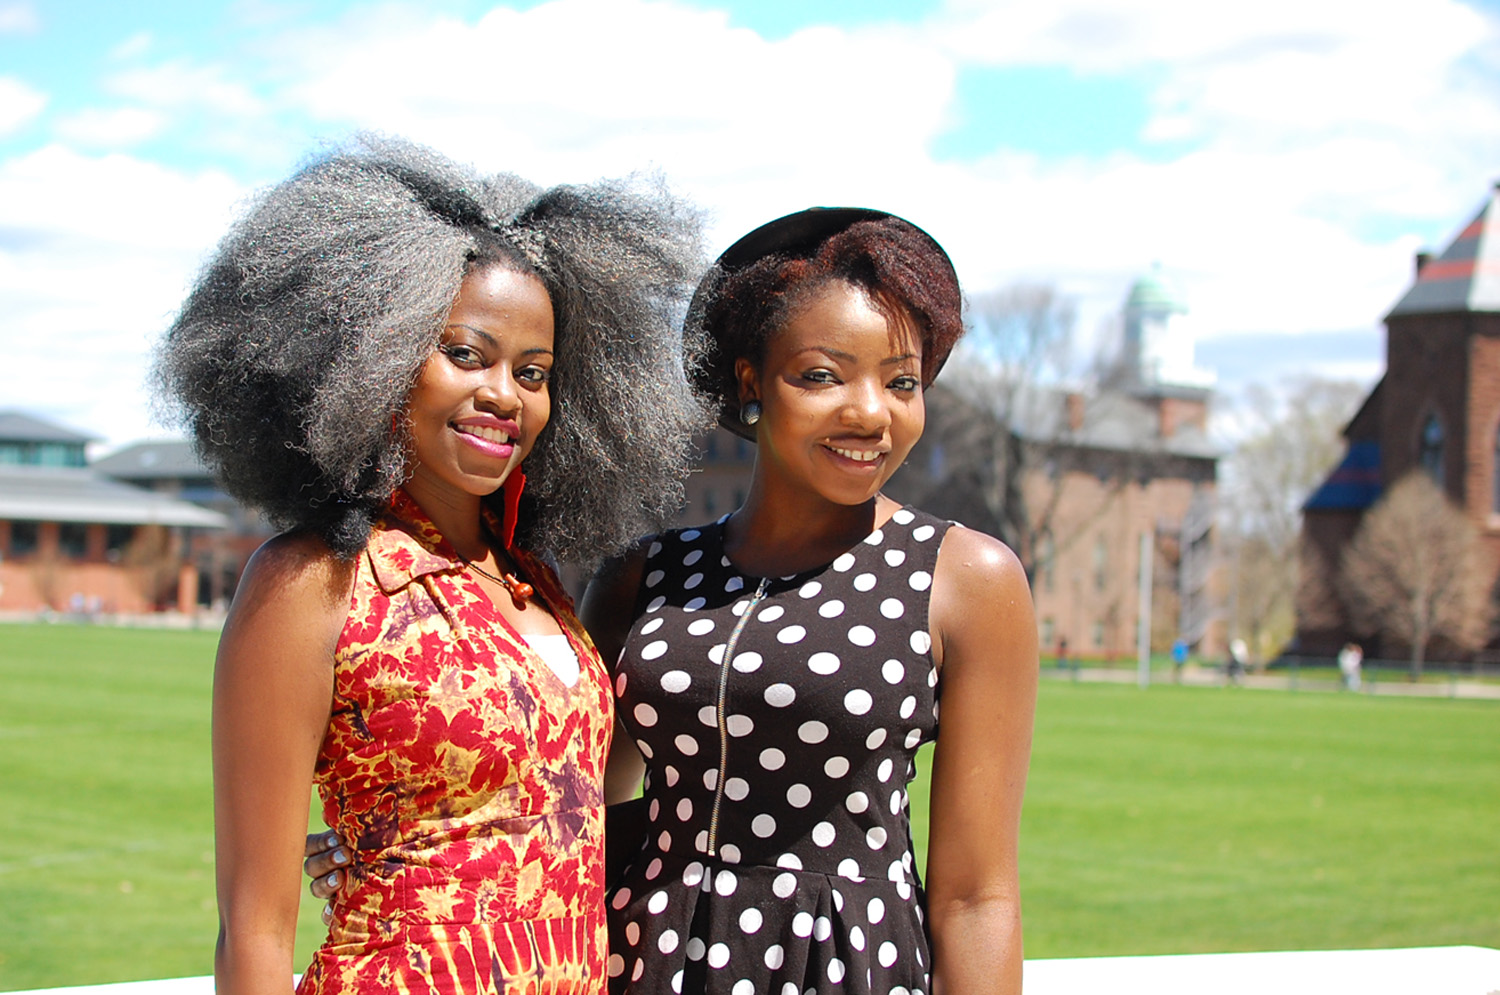 Wesleyan students Claudia Kahindi '18 and Olayinka Lawal '15, 2015 recipients of the Davis Projects for Peace grant.